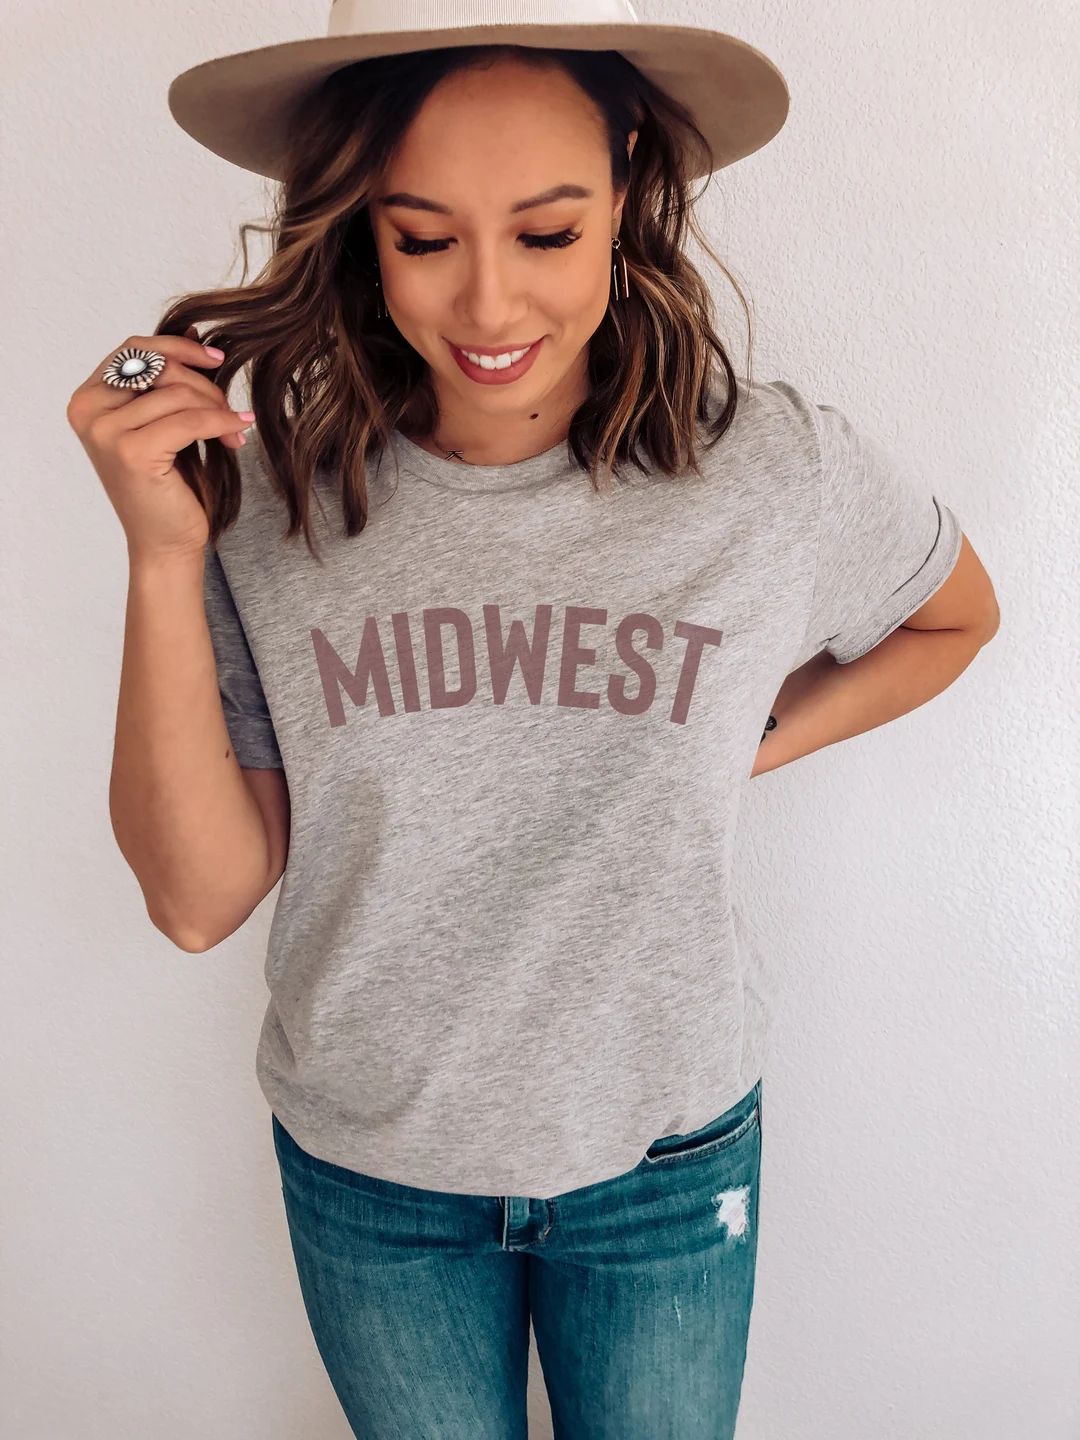 Midwest Shirt, Midwest is Best, Midwest Clothing, Farm Girl Shirt, Country Girl Tshirt, Womens Gr... | Etsy (US)